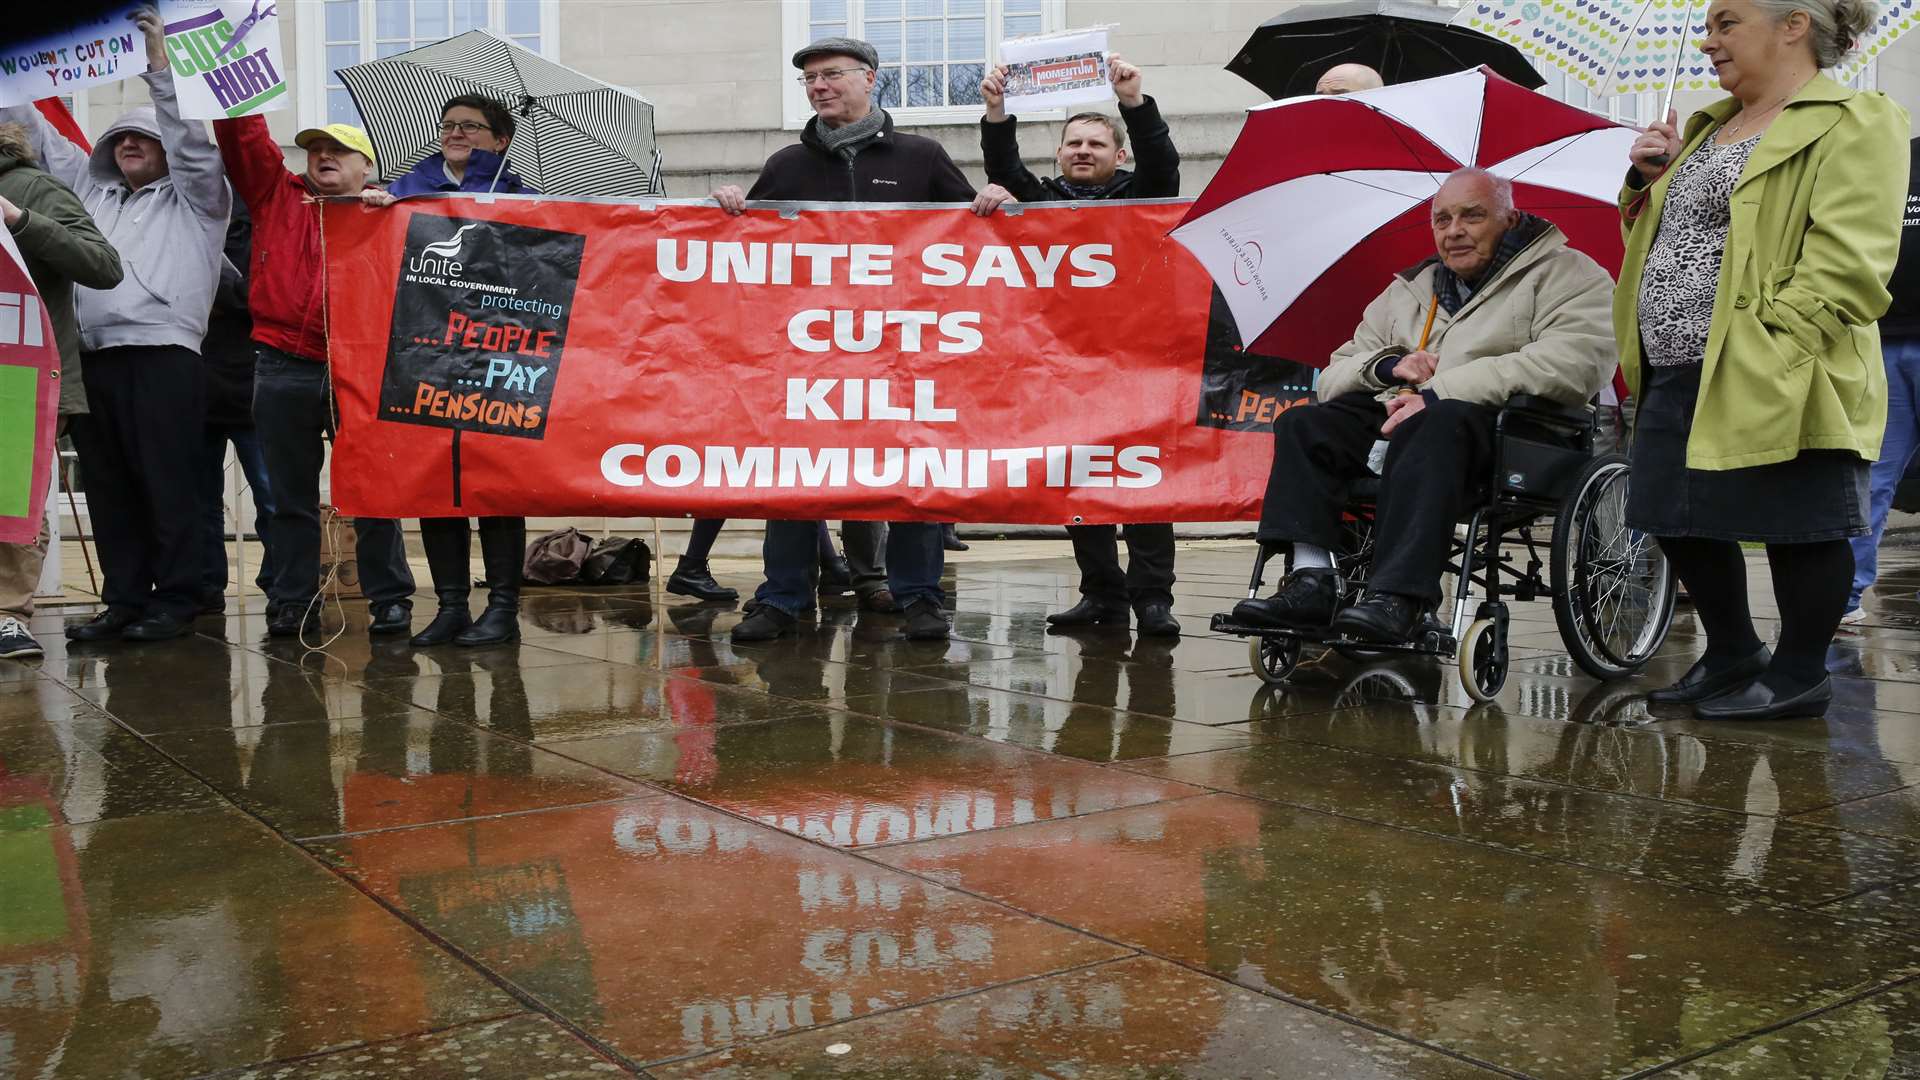 The protest outside County Hall